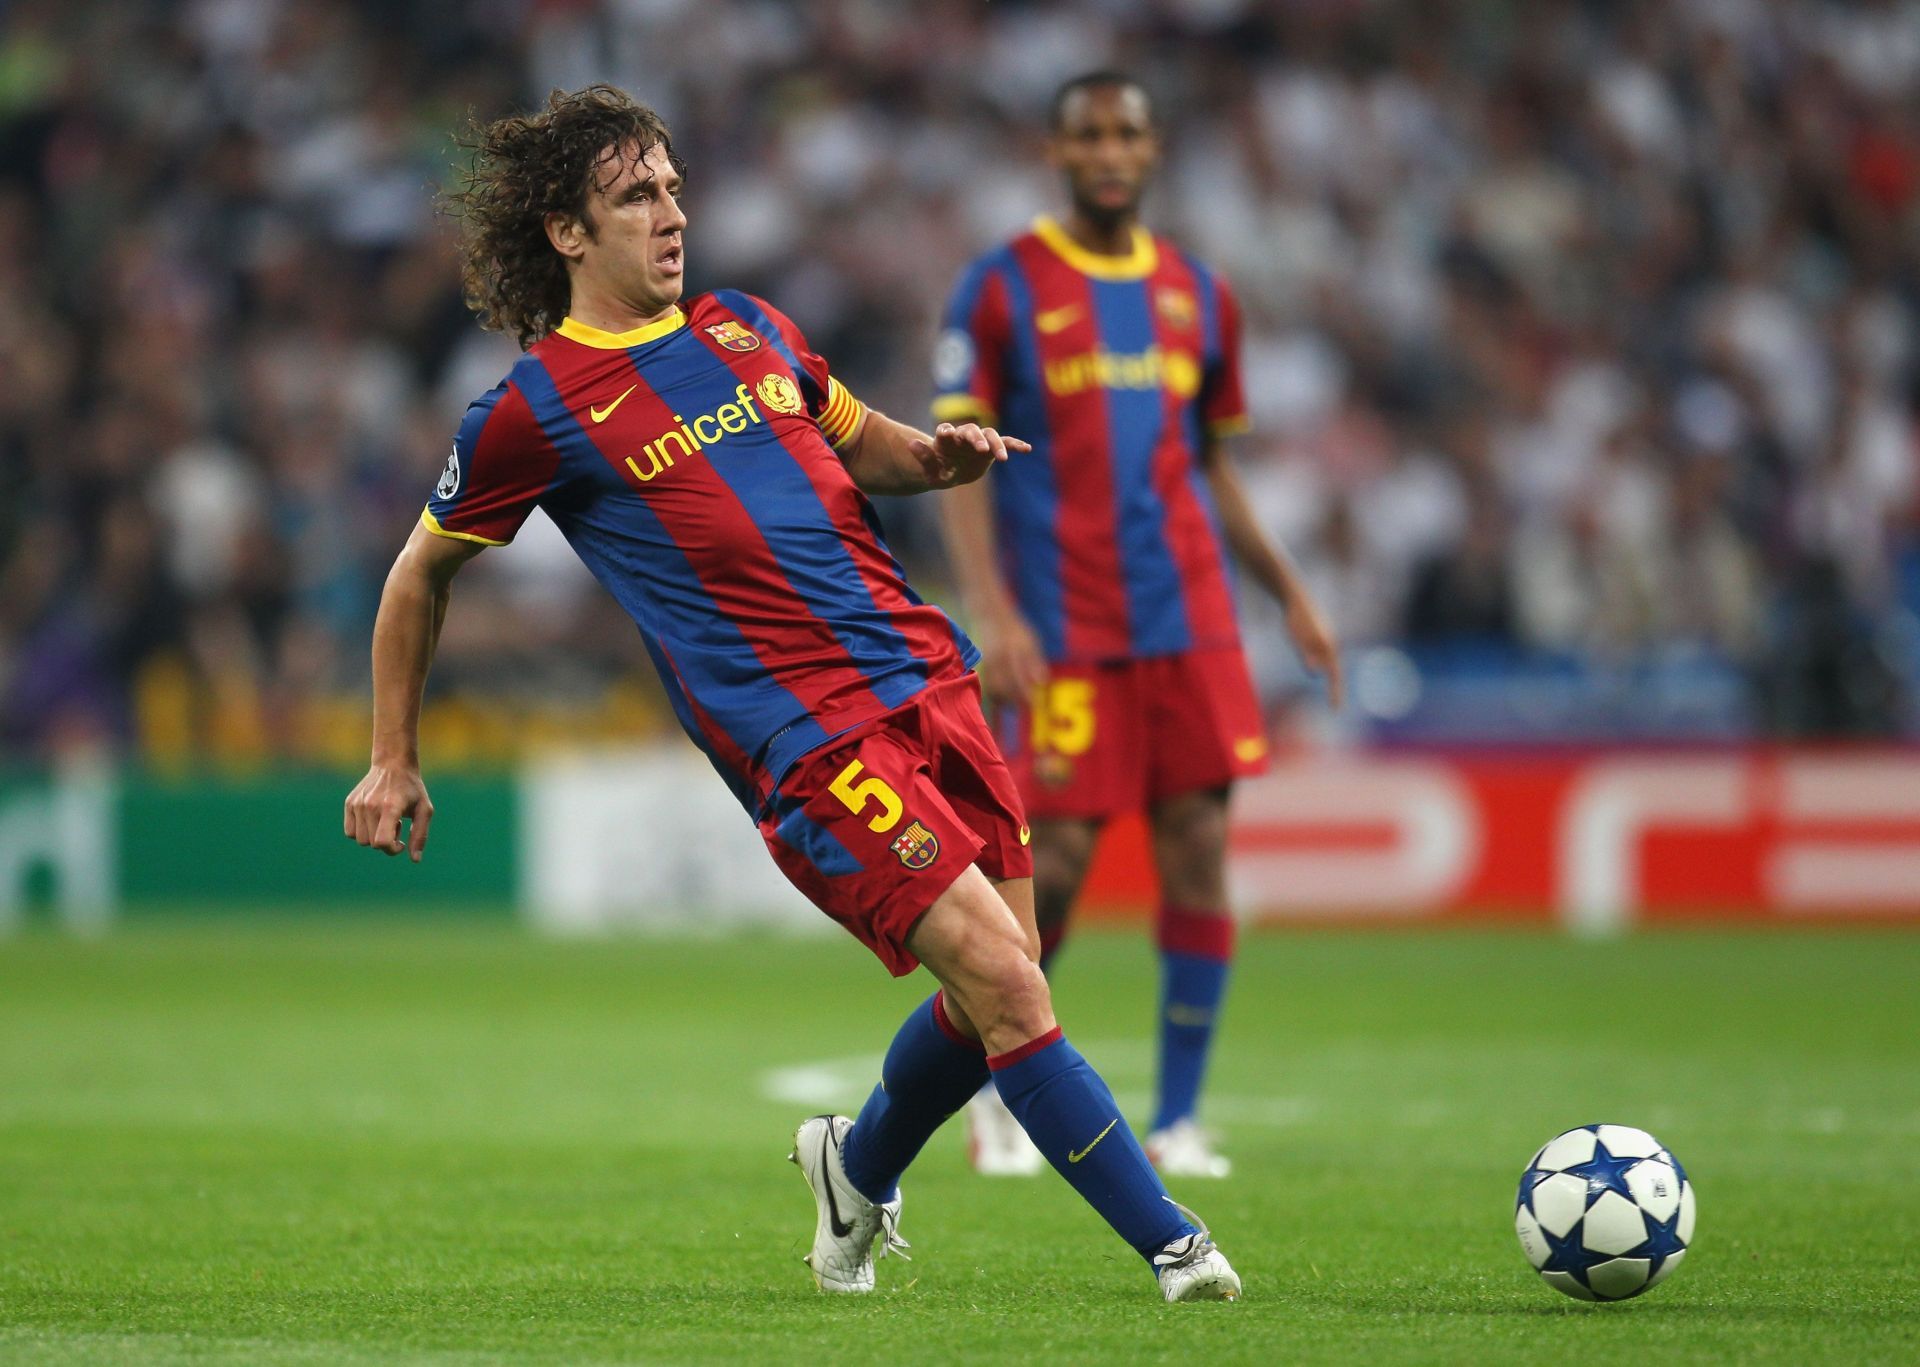 Carles Puyol made 595 appearances for Barcelona